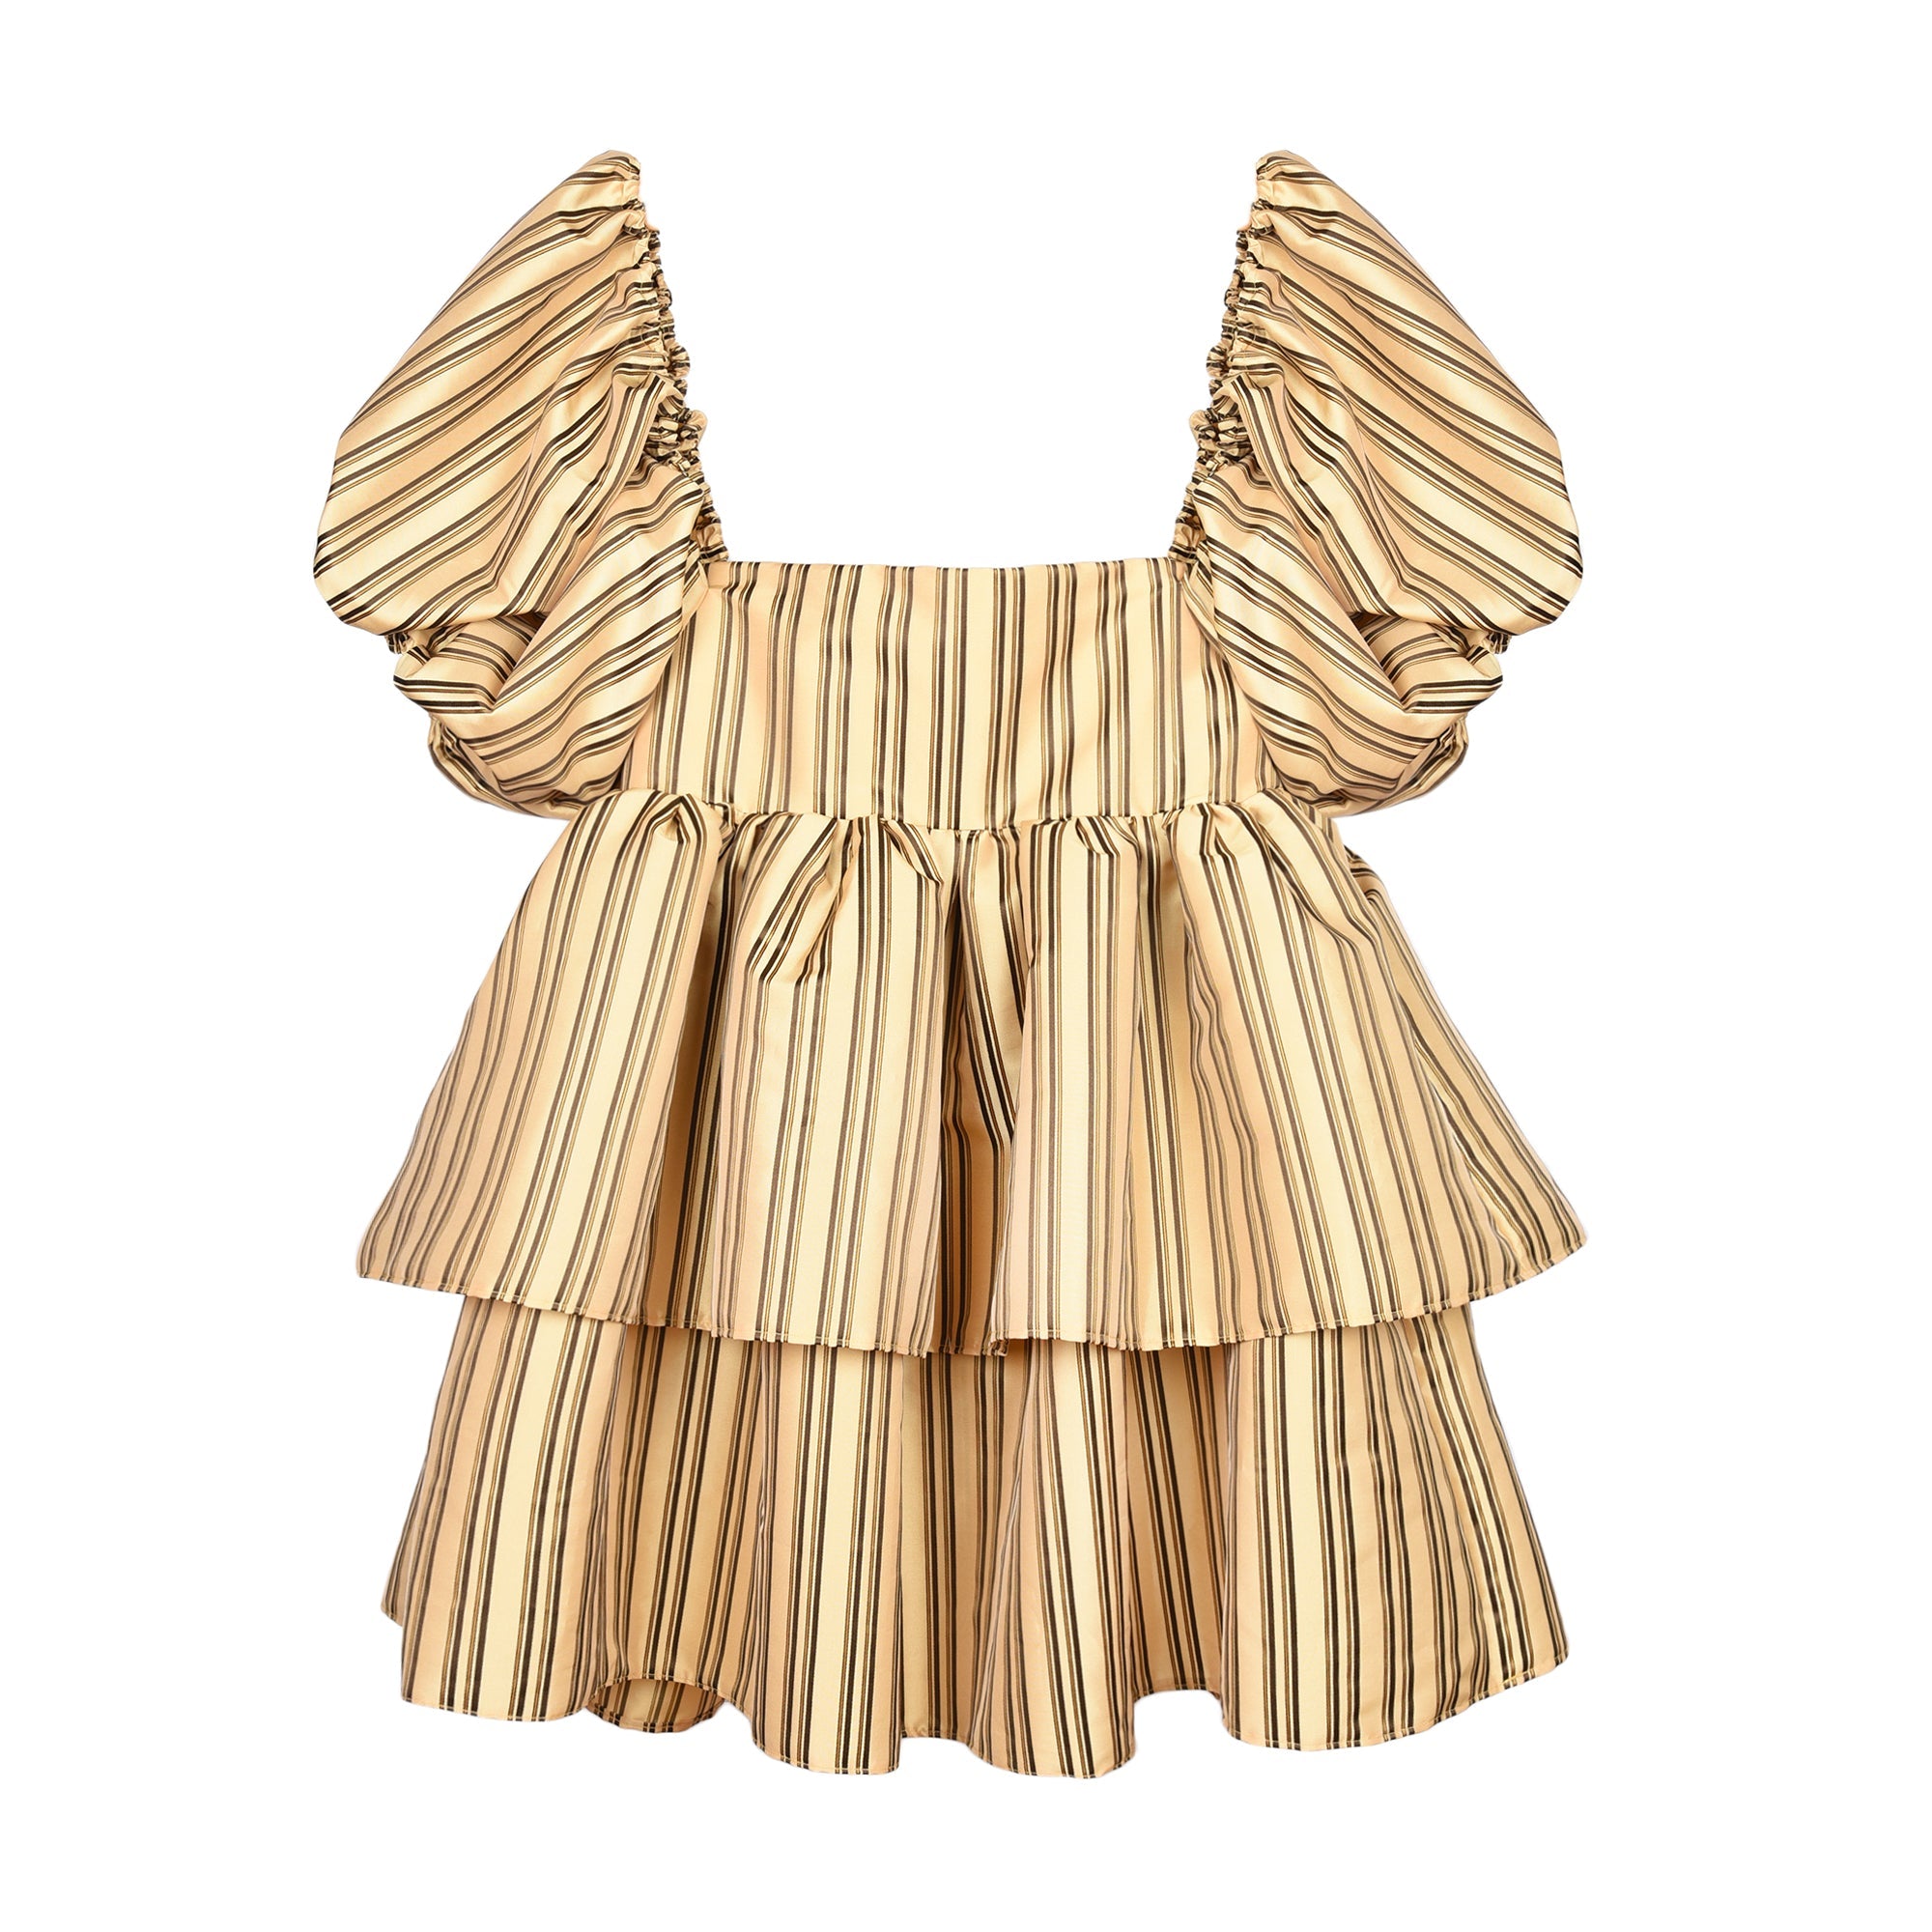 Birthday Suit in Neutral Striped Taffeta by Madeline Marie